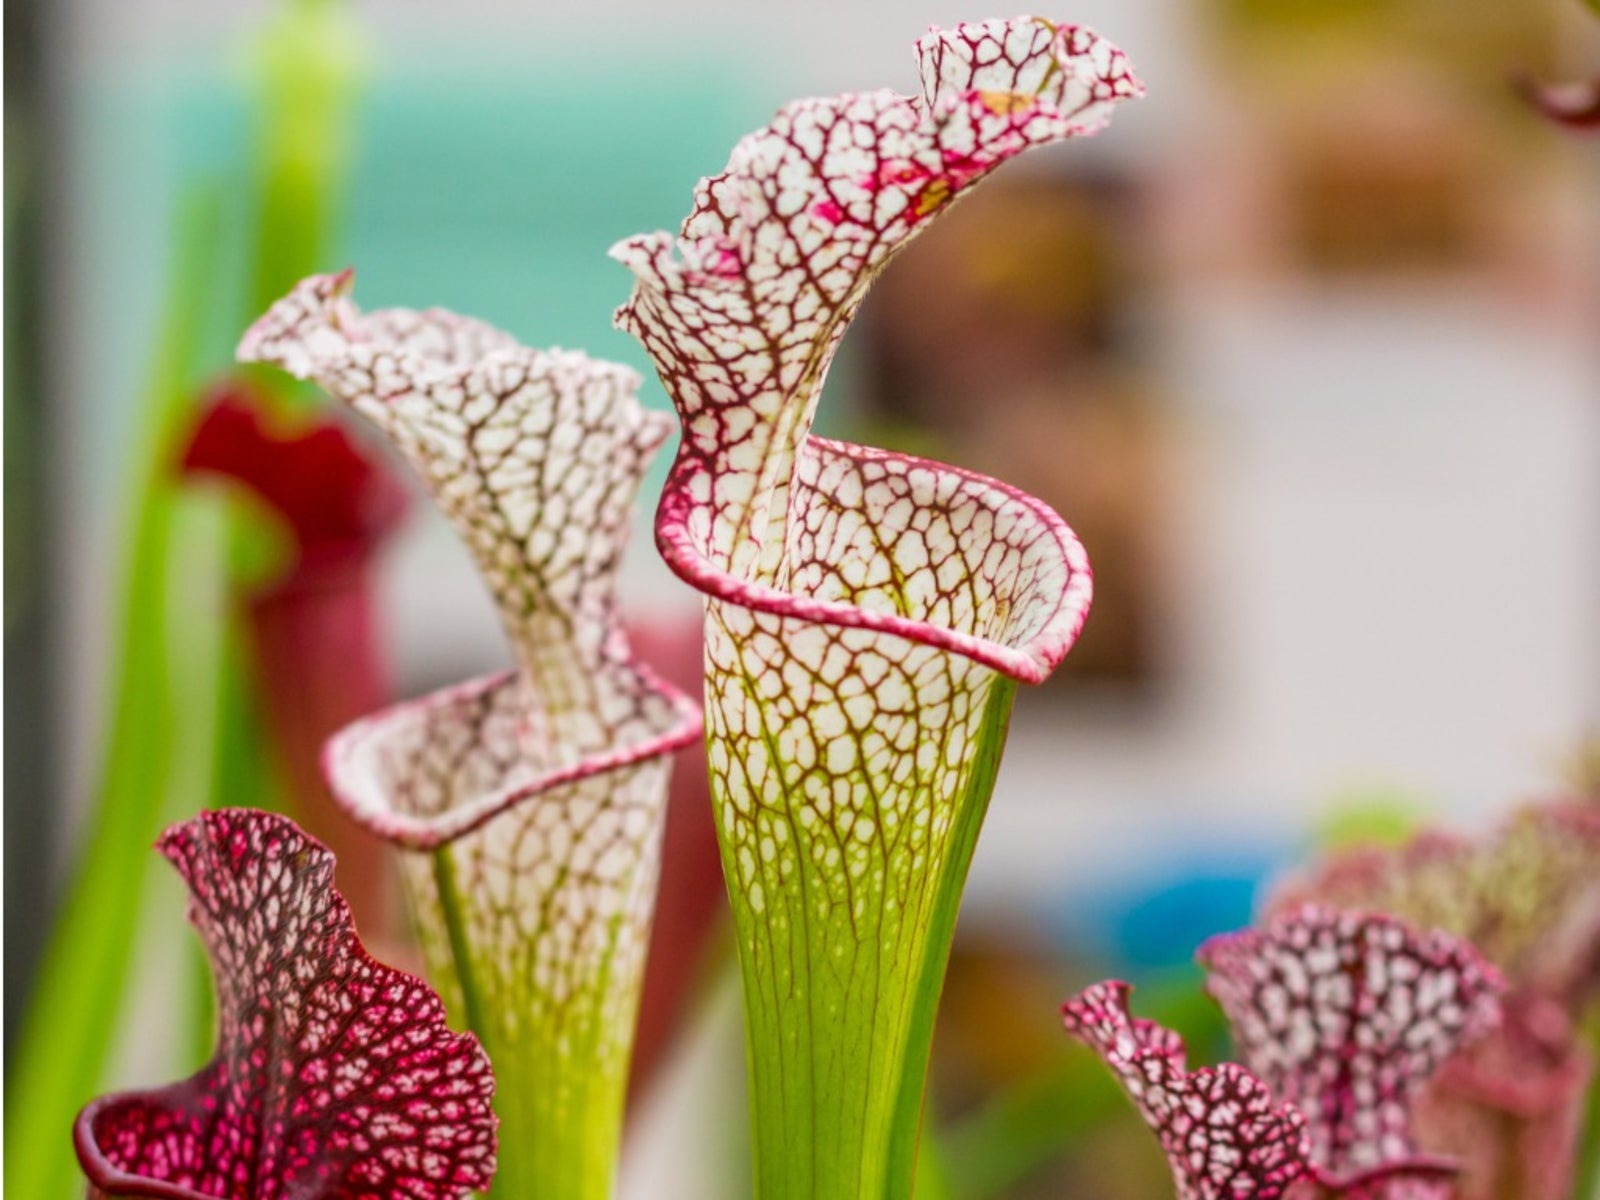 over wintering pitcher plants - caring for pitcher plants in winter